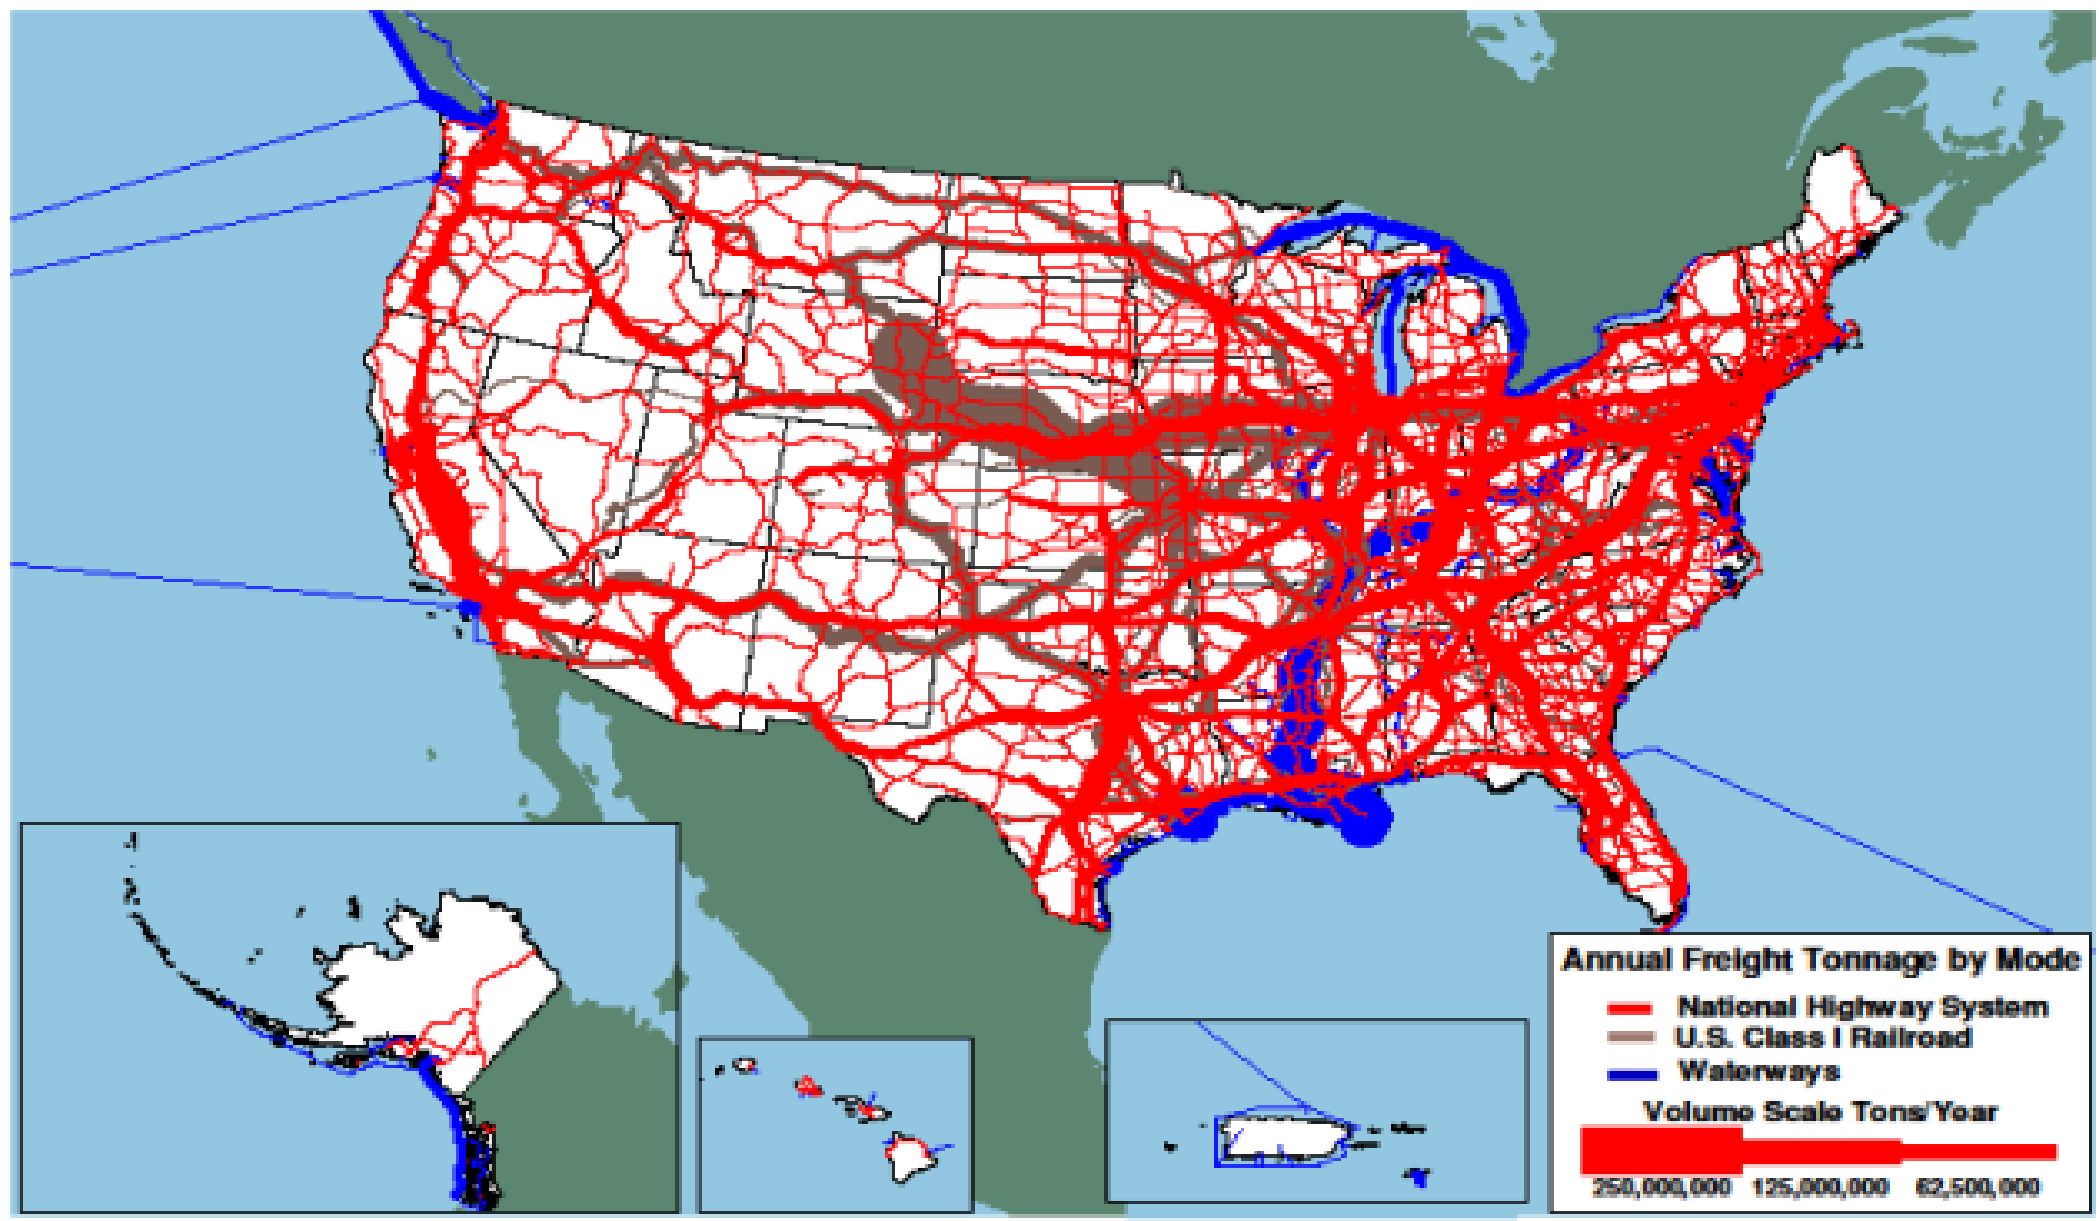 An outline map of the 48 contiguous states and insets for Alaska and Hawaii show freight flows by mode. Freight volume is indicated by line thickness for 250 million tons per year, 125 million tons per year, and 62.5 million tons per year. Highways have numerous routes shown across the map. The heaviest volume is in the region that includes the east coast and Midwest states; heavy volume is also shown across the southern states, California, and Washington. Railroads show the heaviest volume in states in the Great Plains. Inland Waterways are dominated by freight on the Ohio and Mississippi Rivers, increasing with flow southward to the Gulf of Mexico. Sources: Highways-Federal Highway Administration, Freight Analysis Framework, Version 3.4, 2013; Rail-Surface Transportation Board, Annual Carload Waybill Sample, Federal Railroad Administration, rail freight flow assignments (2013); Waterways-U.S. Army Corps of Engineers (USACE), Annual Vessel Operating Activity, Tennessee Valley Authority, Lock Performance Monitoring System data for USACE, USACE Institute for Water Resources, Waterborne Foreign Trade Data, USACE water flow assignments (2013).  